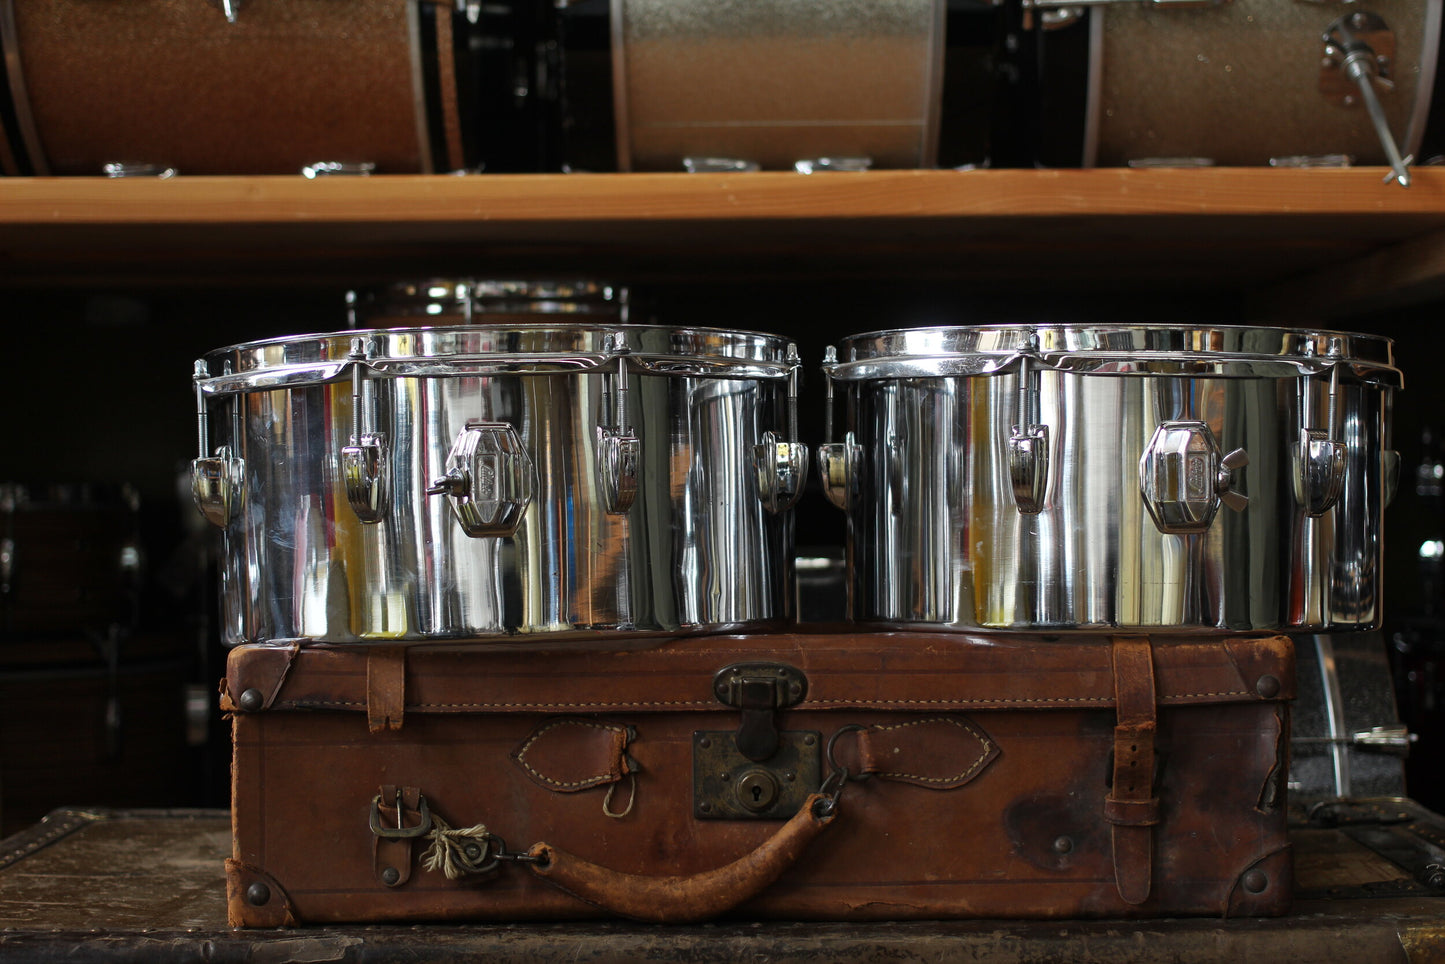 1968 Ludwig "Carioca" Outfit 14x22 16x16 w/ 13" & 14" Timbales